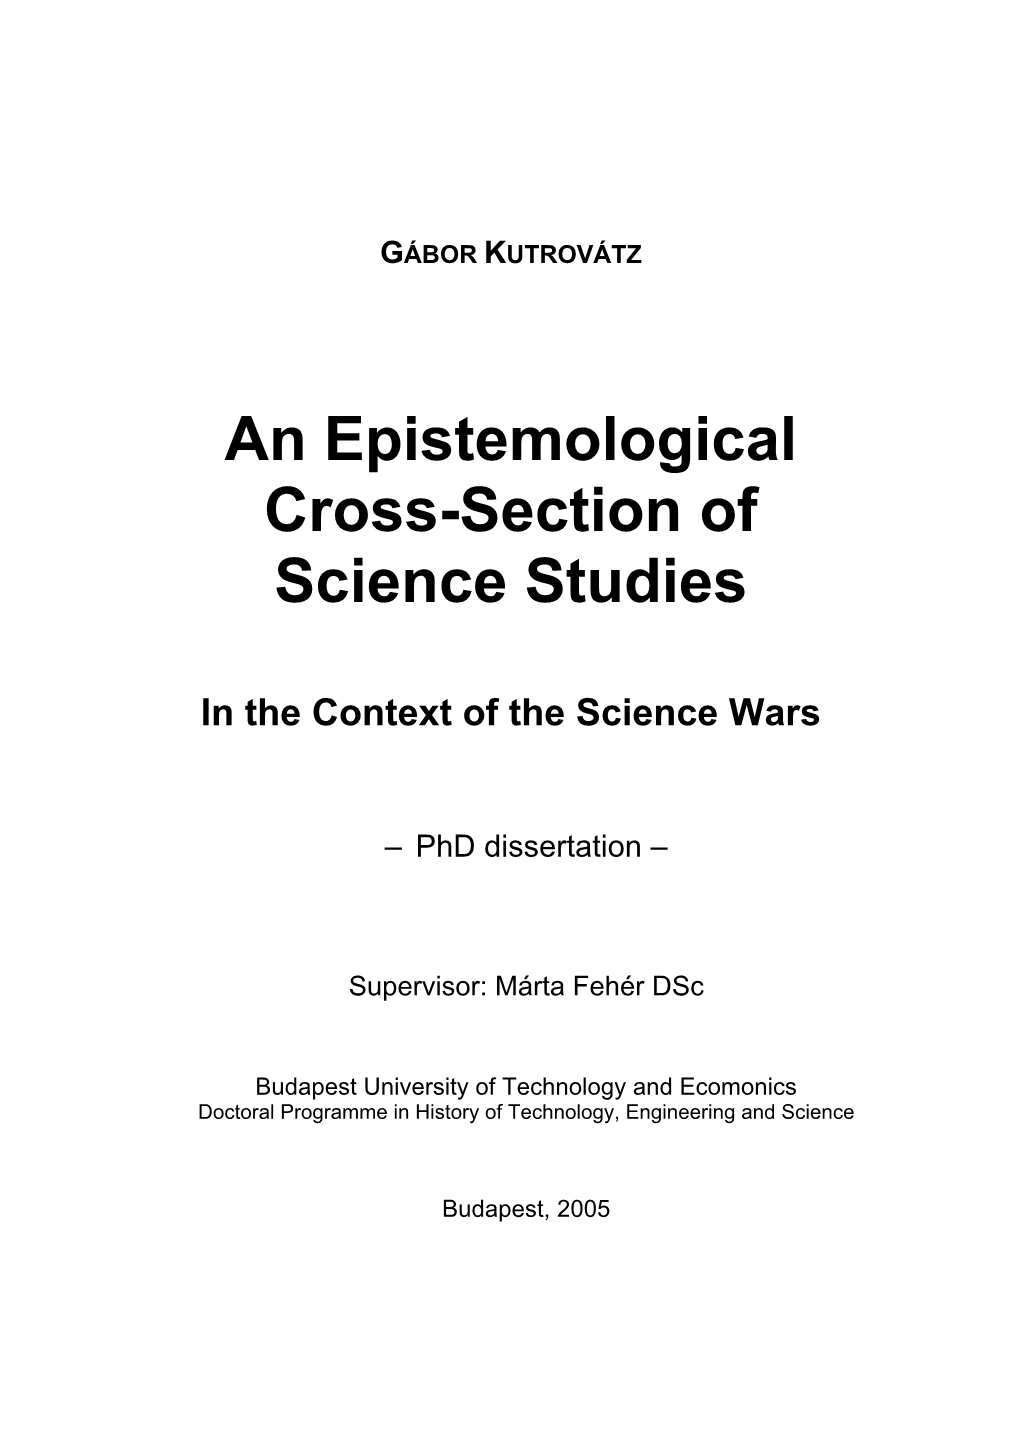 An Epistemological Cross-Section of Science Studies